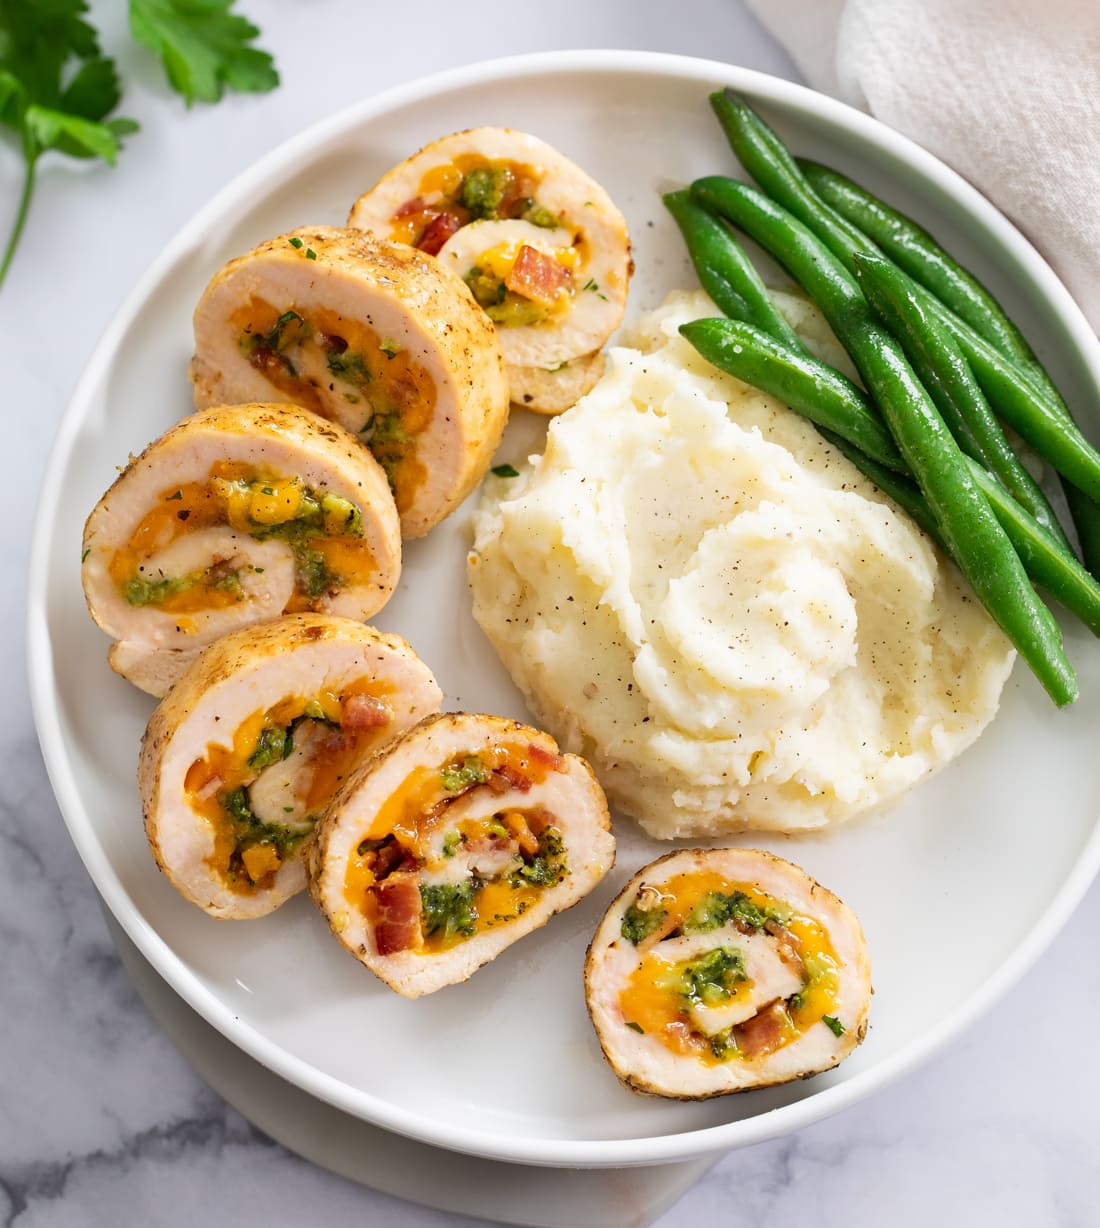 Slices of Chicken Roulade on a white plate with mashed potatoes and green beans.